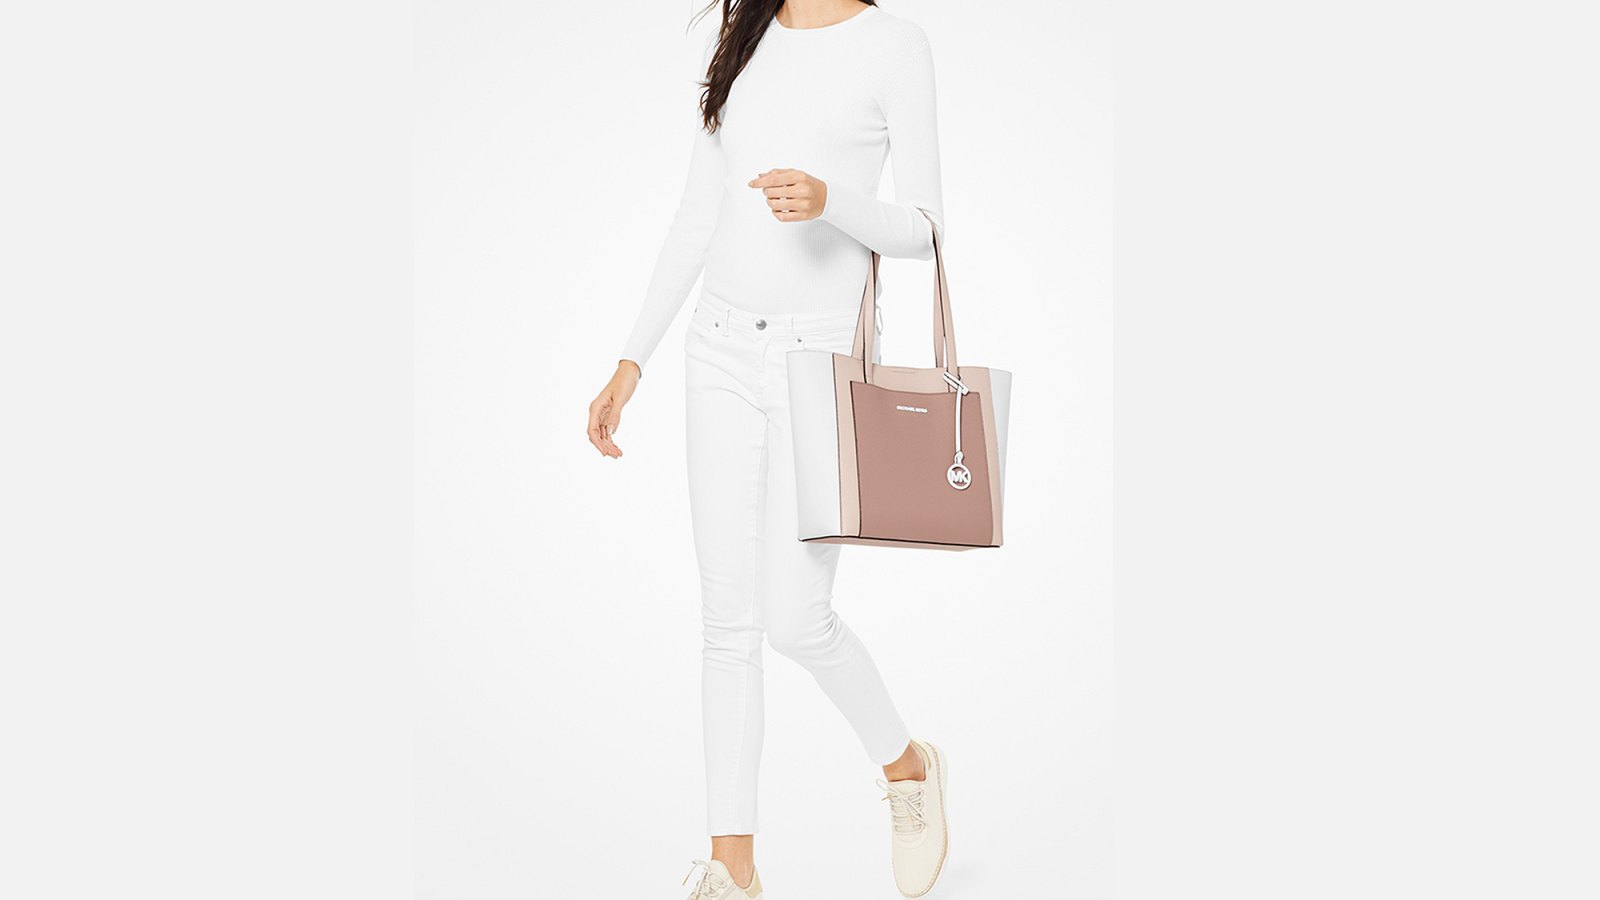 MICHAEL KORS OUTLET SHOES HANDBAGS 60% OFF MARKDOWNS ADDITIONAL 20